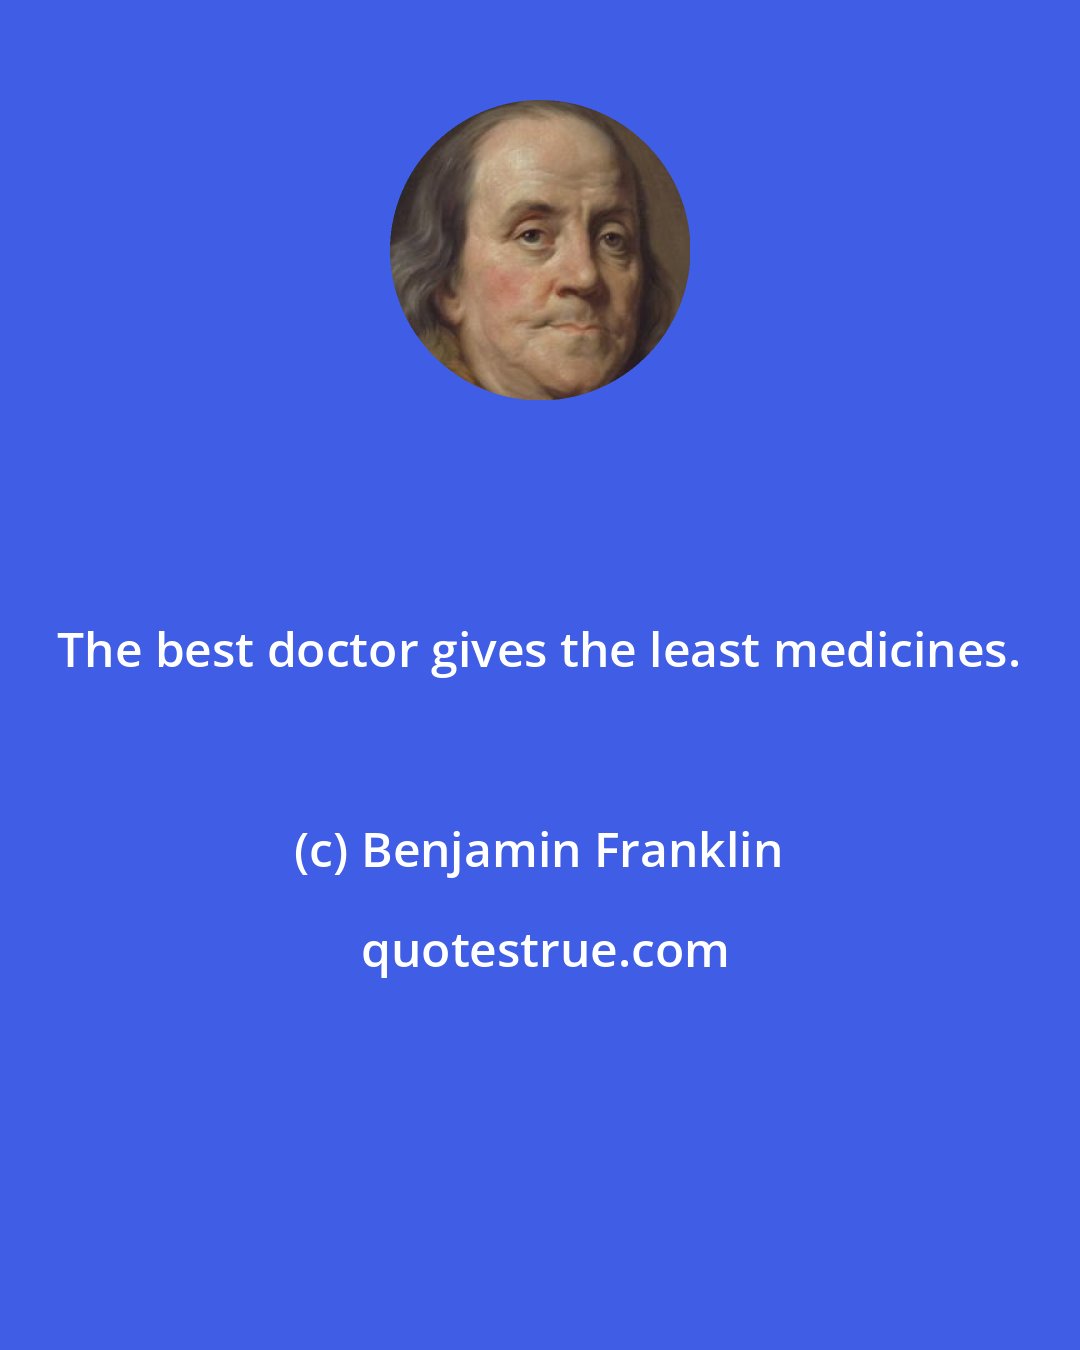 Benjamin Franklin: The best doctor gives the least medicines.